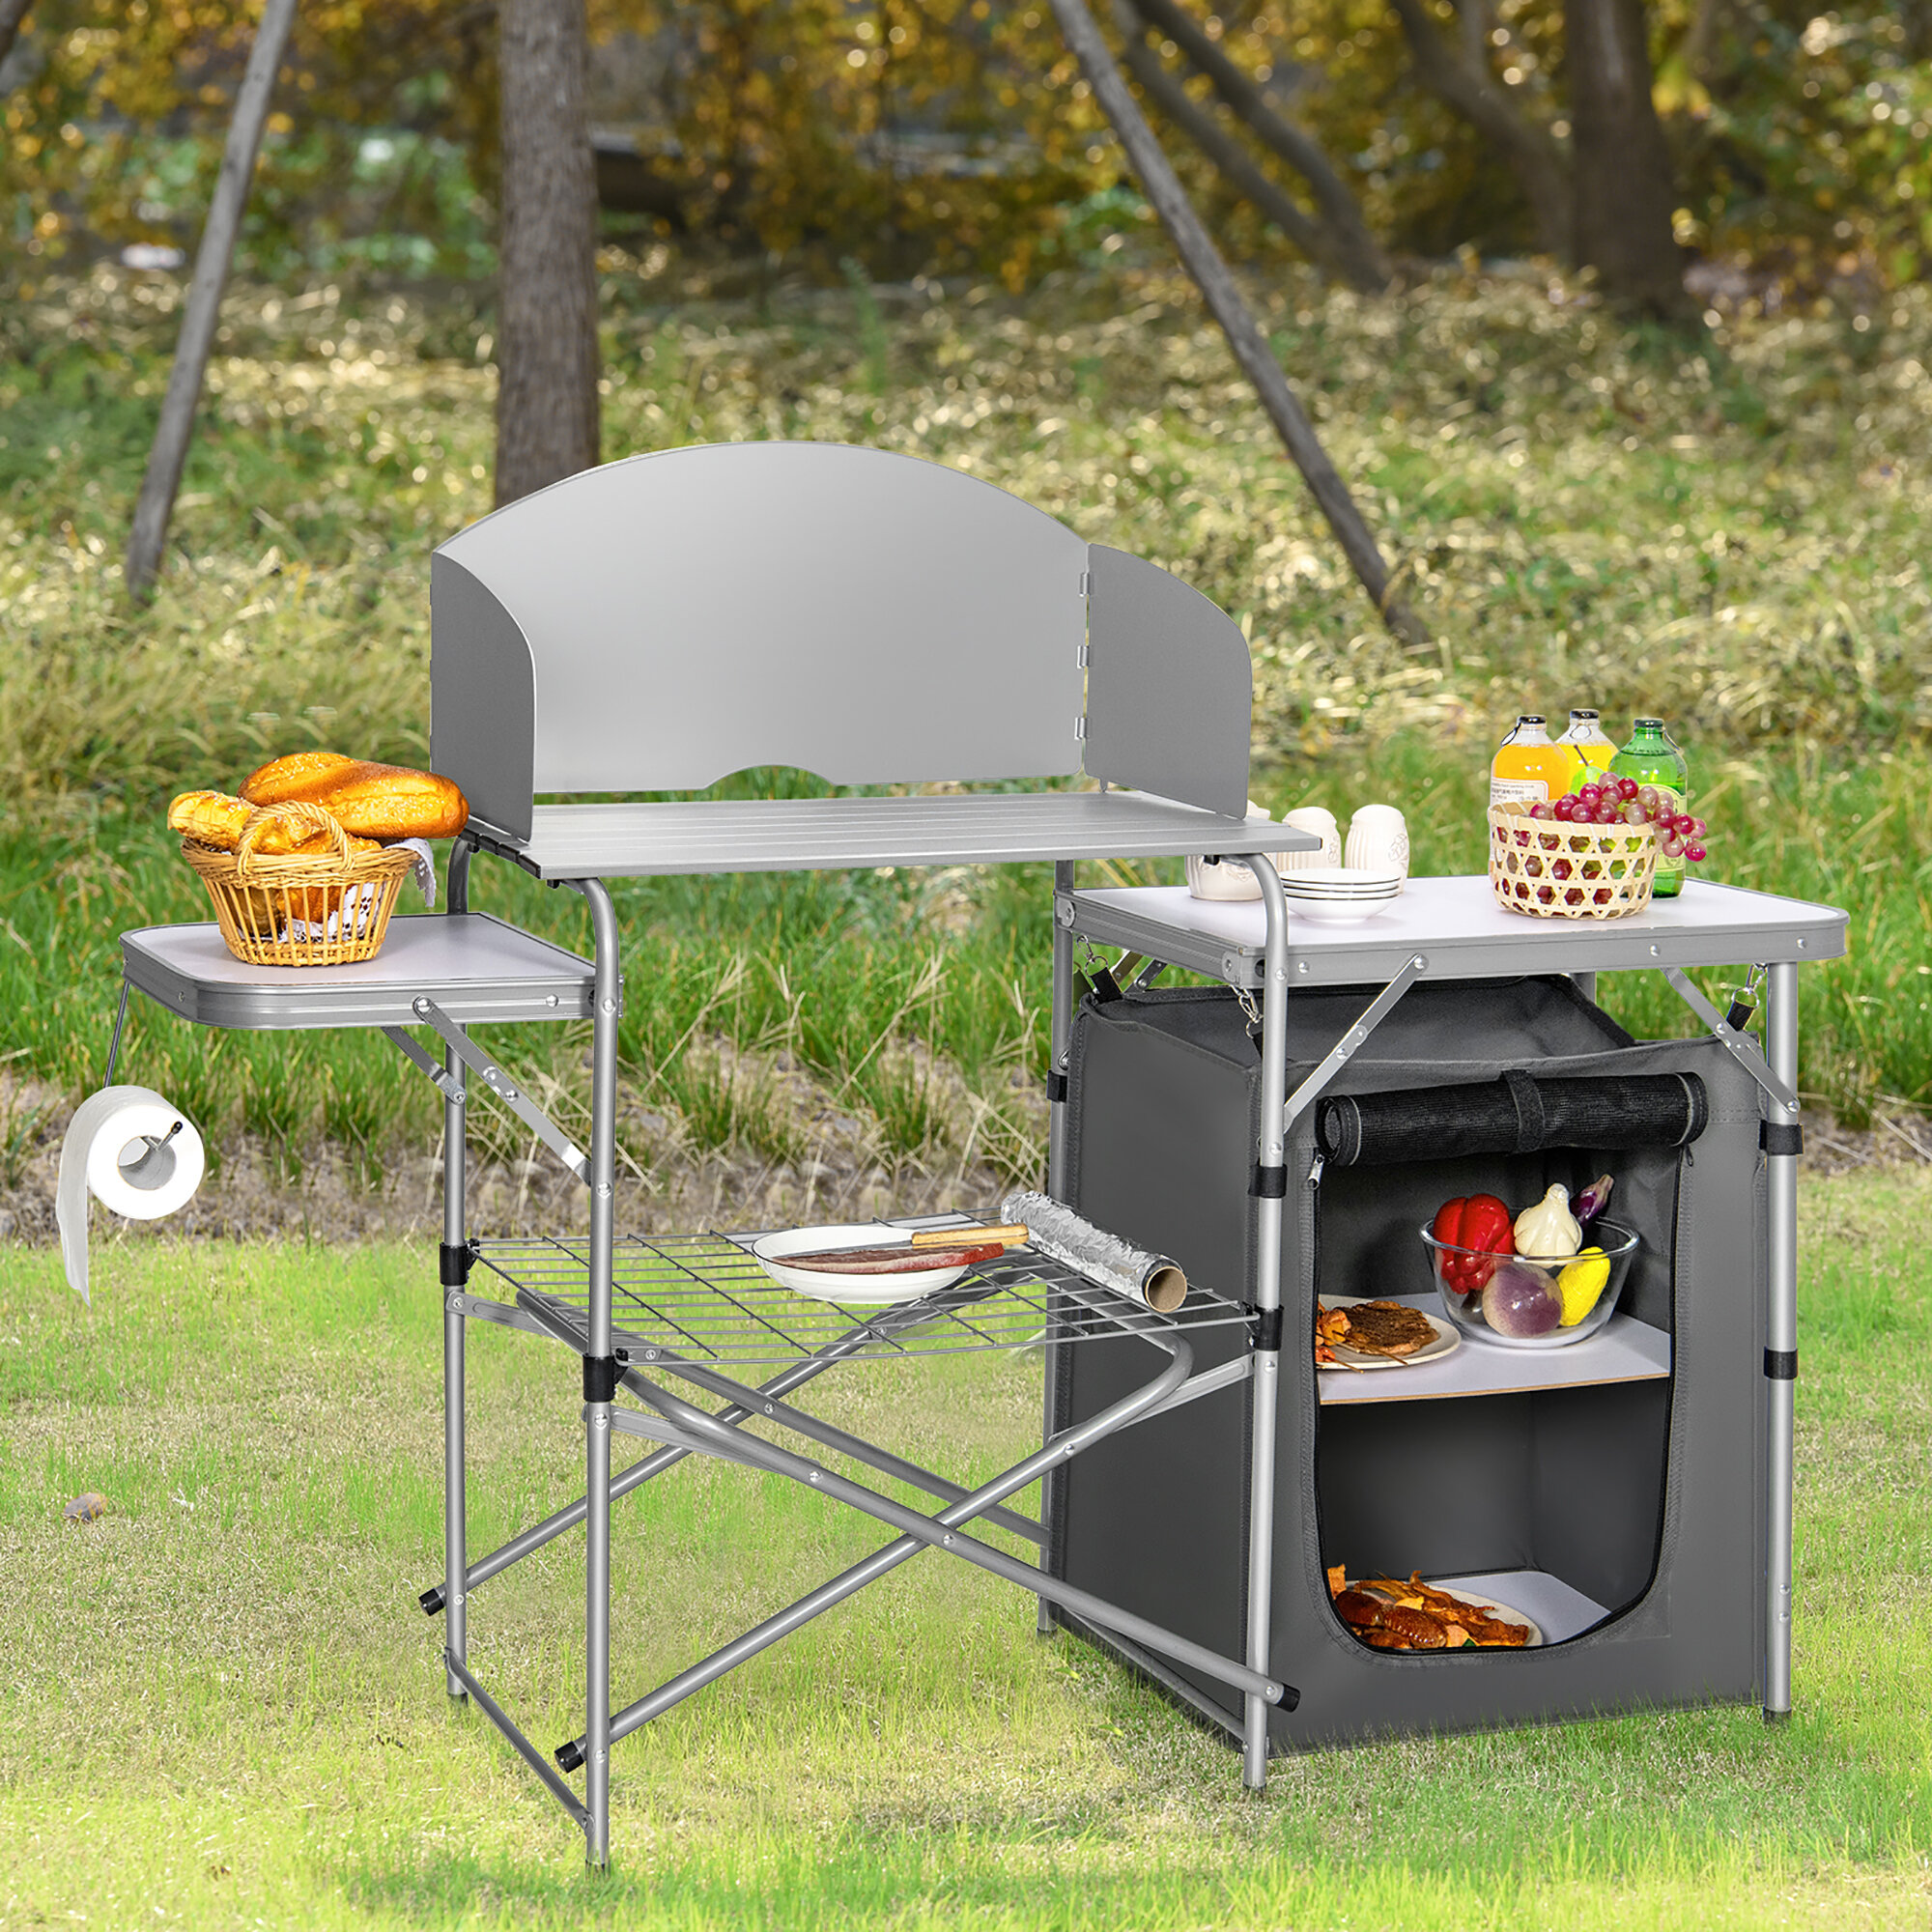 Costway Folding Portable Aluminum Camping Grill Table W/ Storage